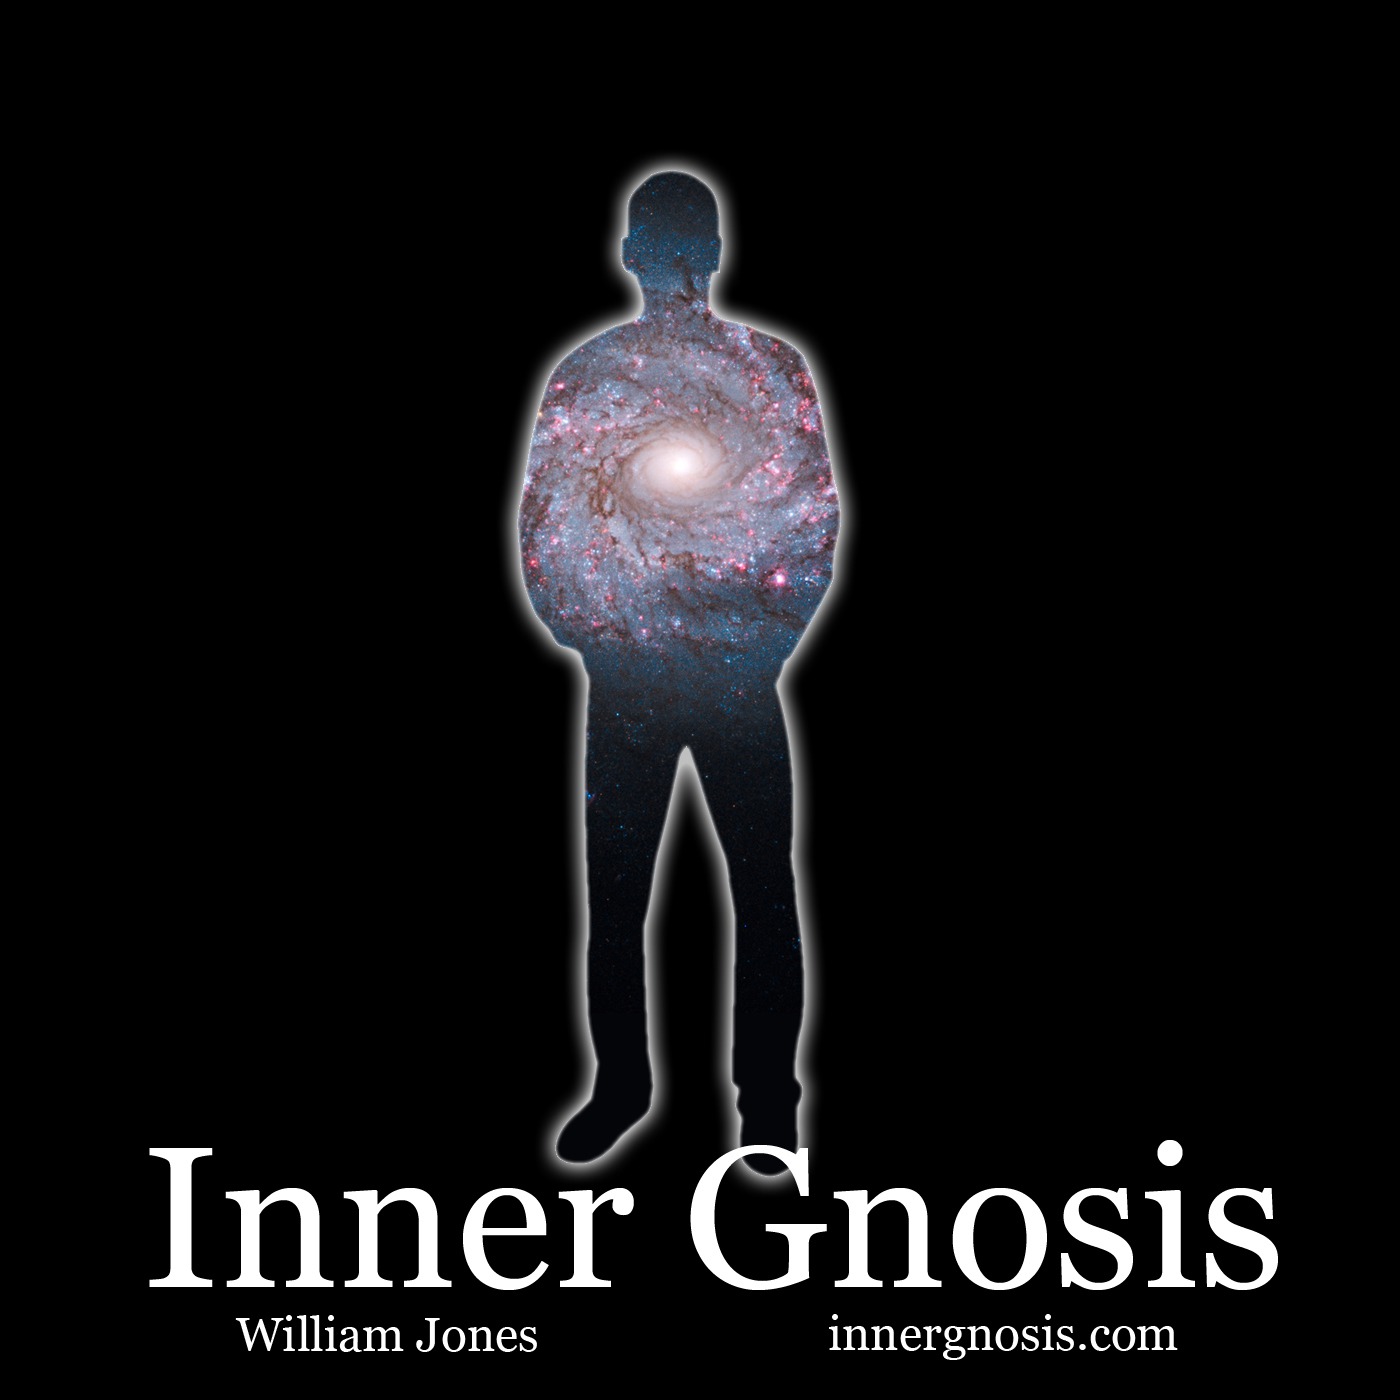 Inner Gnosis Episode 0 - Introduction